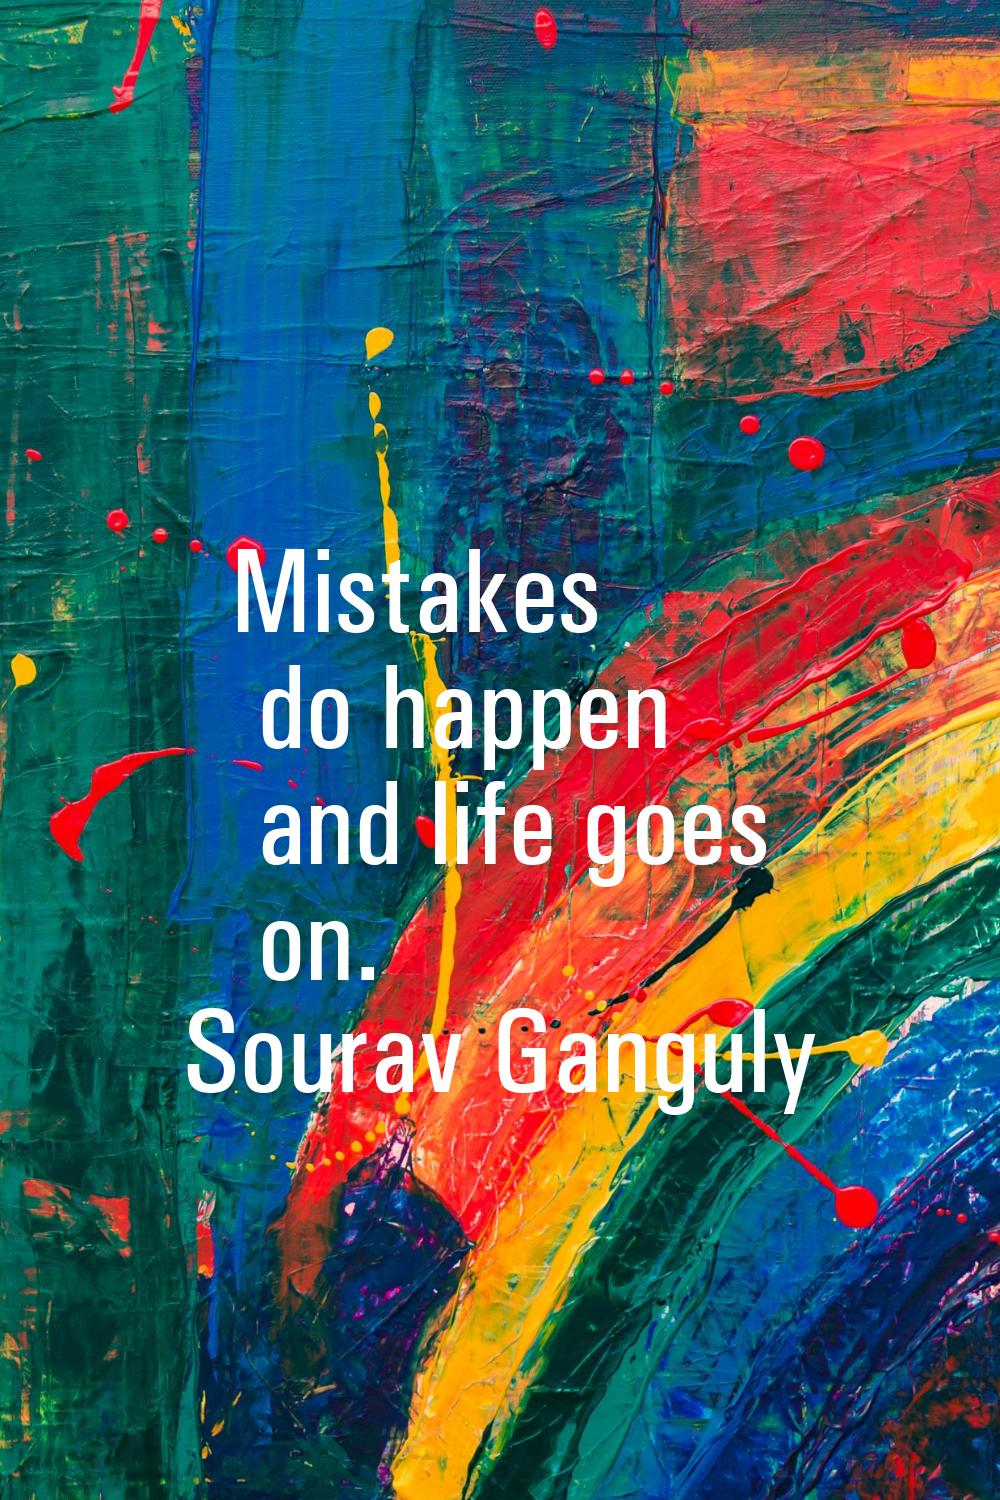 Mistakes do happen and life goes on.